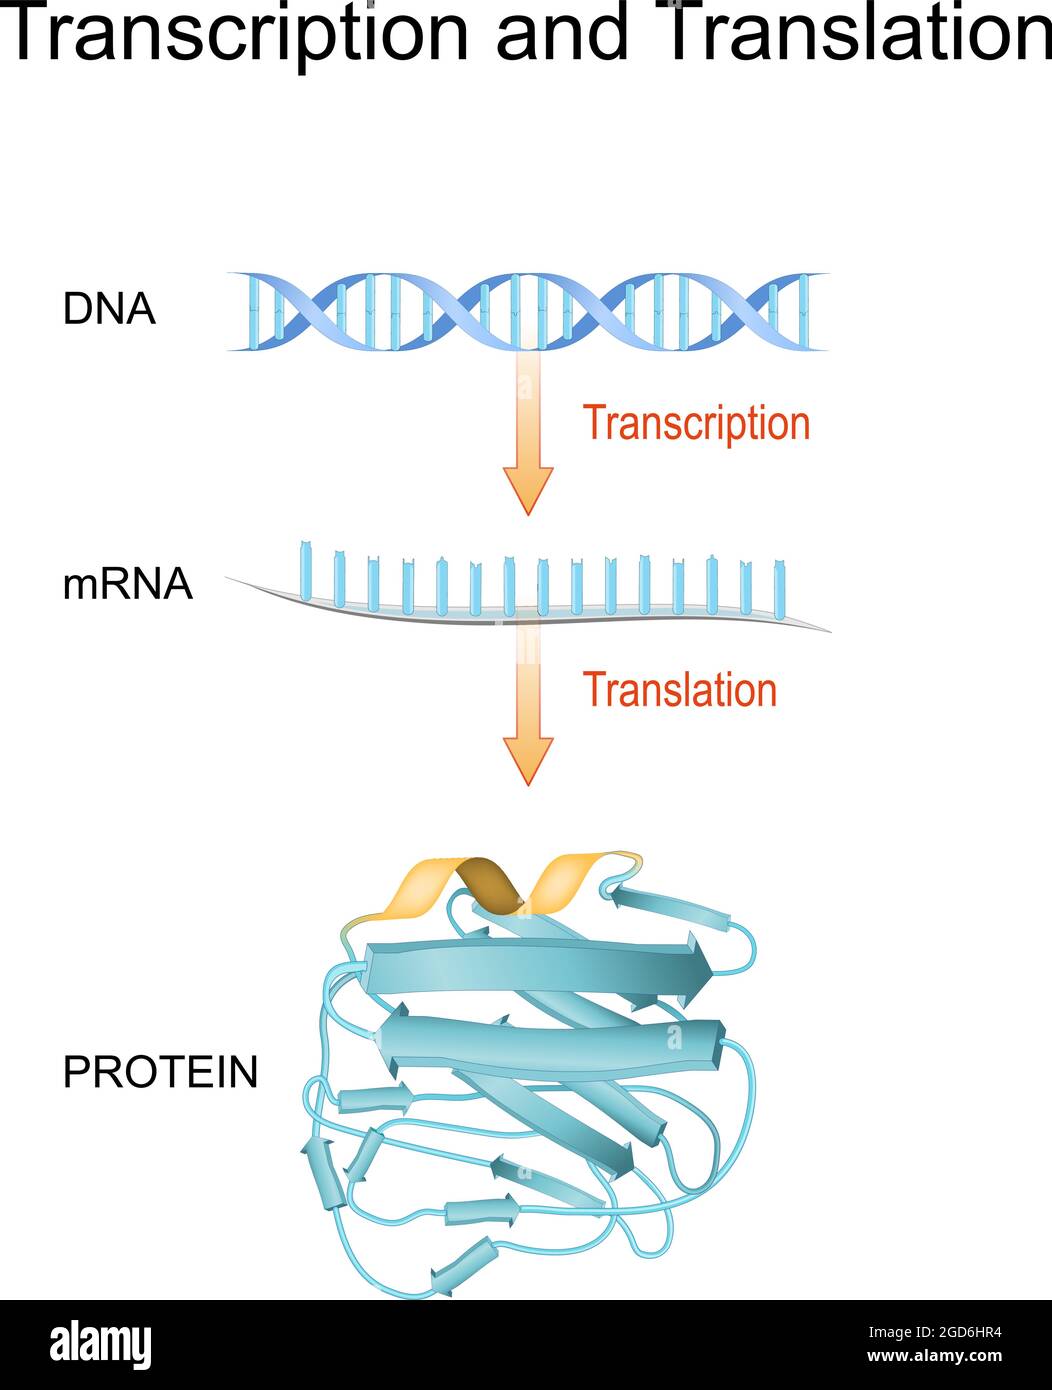 DNA, RNA, mRNA and Protein synthesis. Difference between Transcription and Translation. Biological functions of DNA. Genes and genomes. Genetic code. Stock Vector